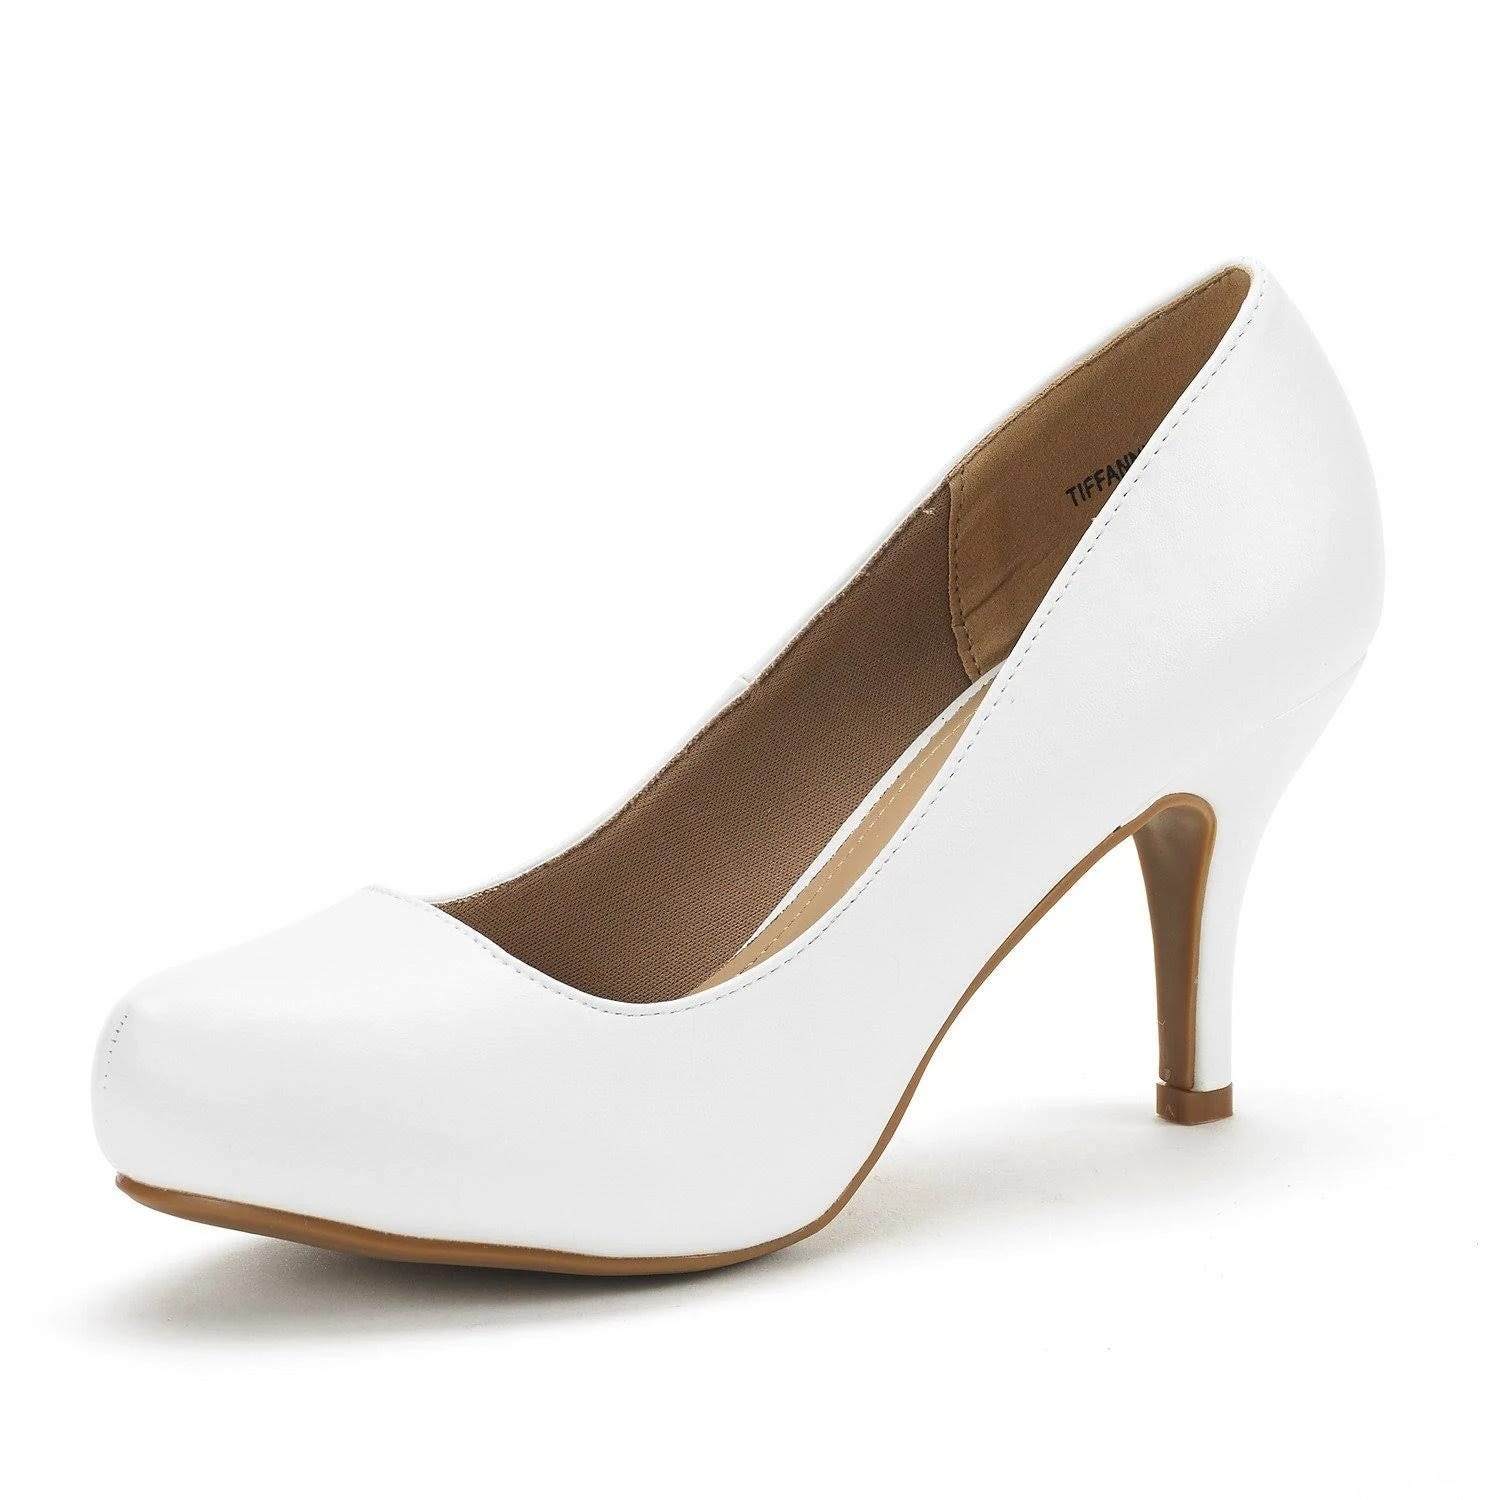 Elegant White Low Stiletto Heel Dress Pumps for Women: The Perfect Elevation and Comfort | Image